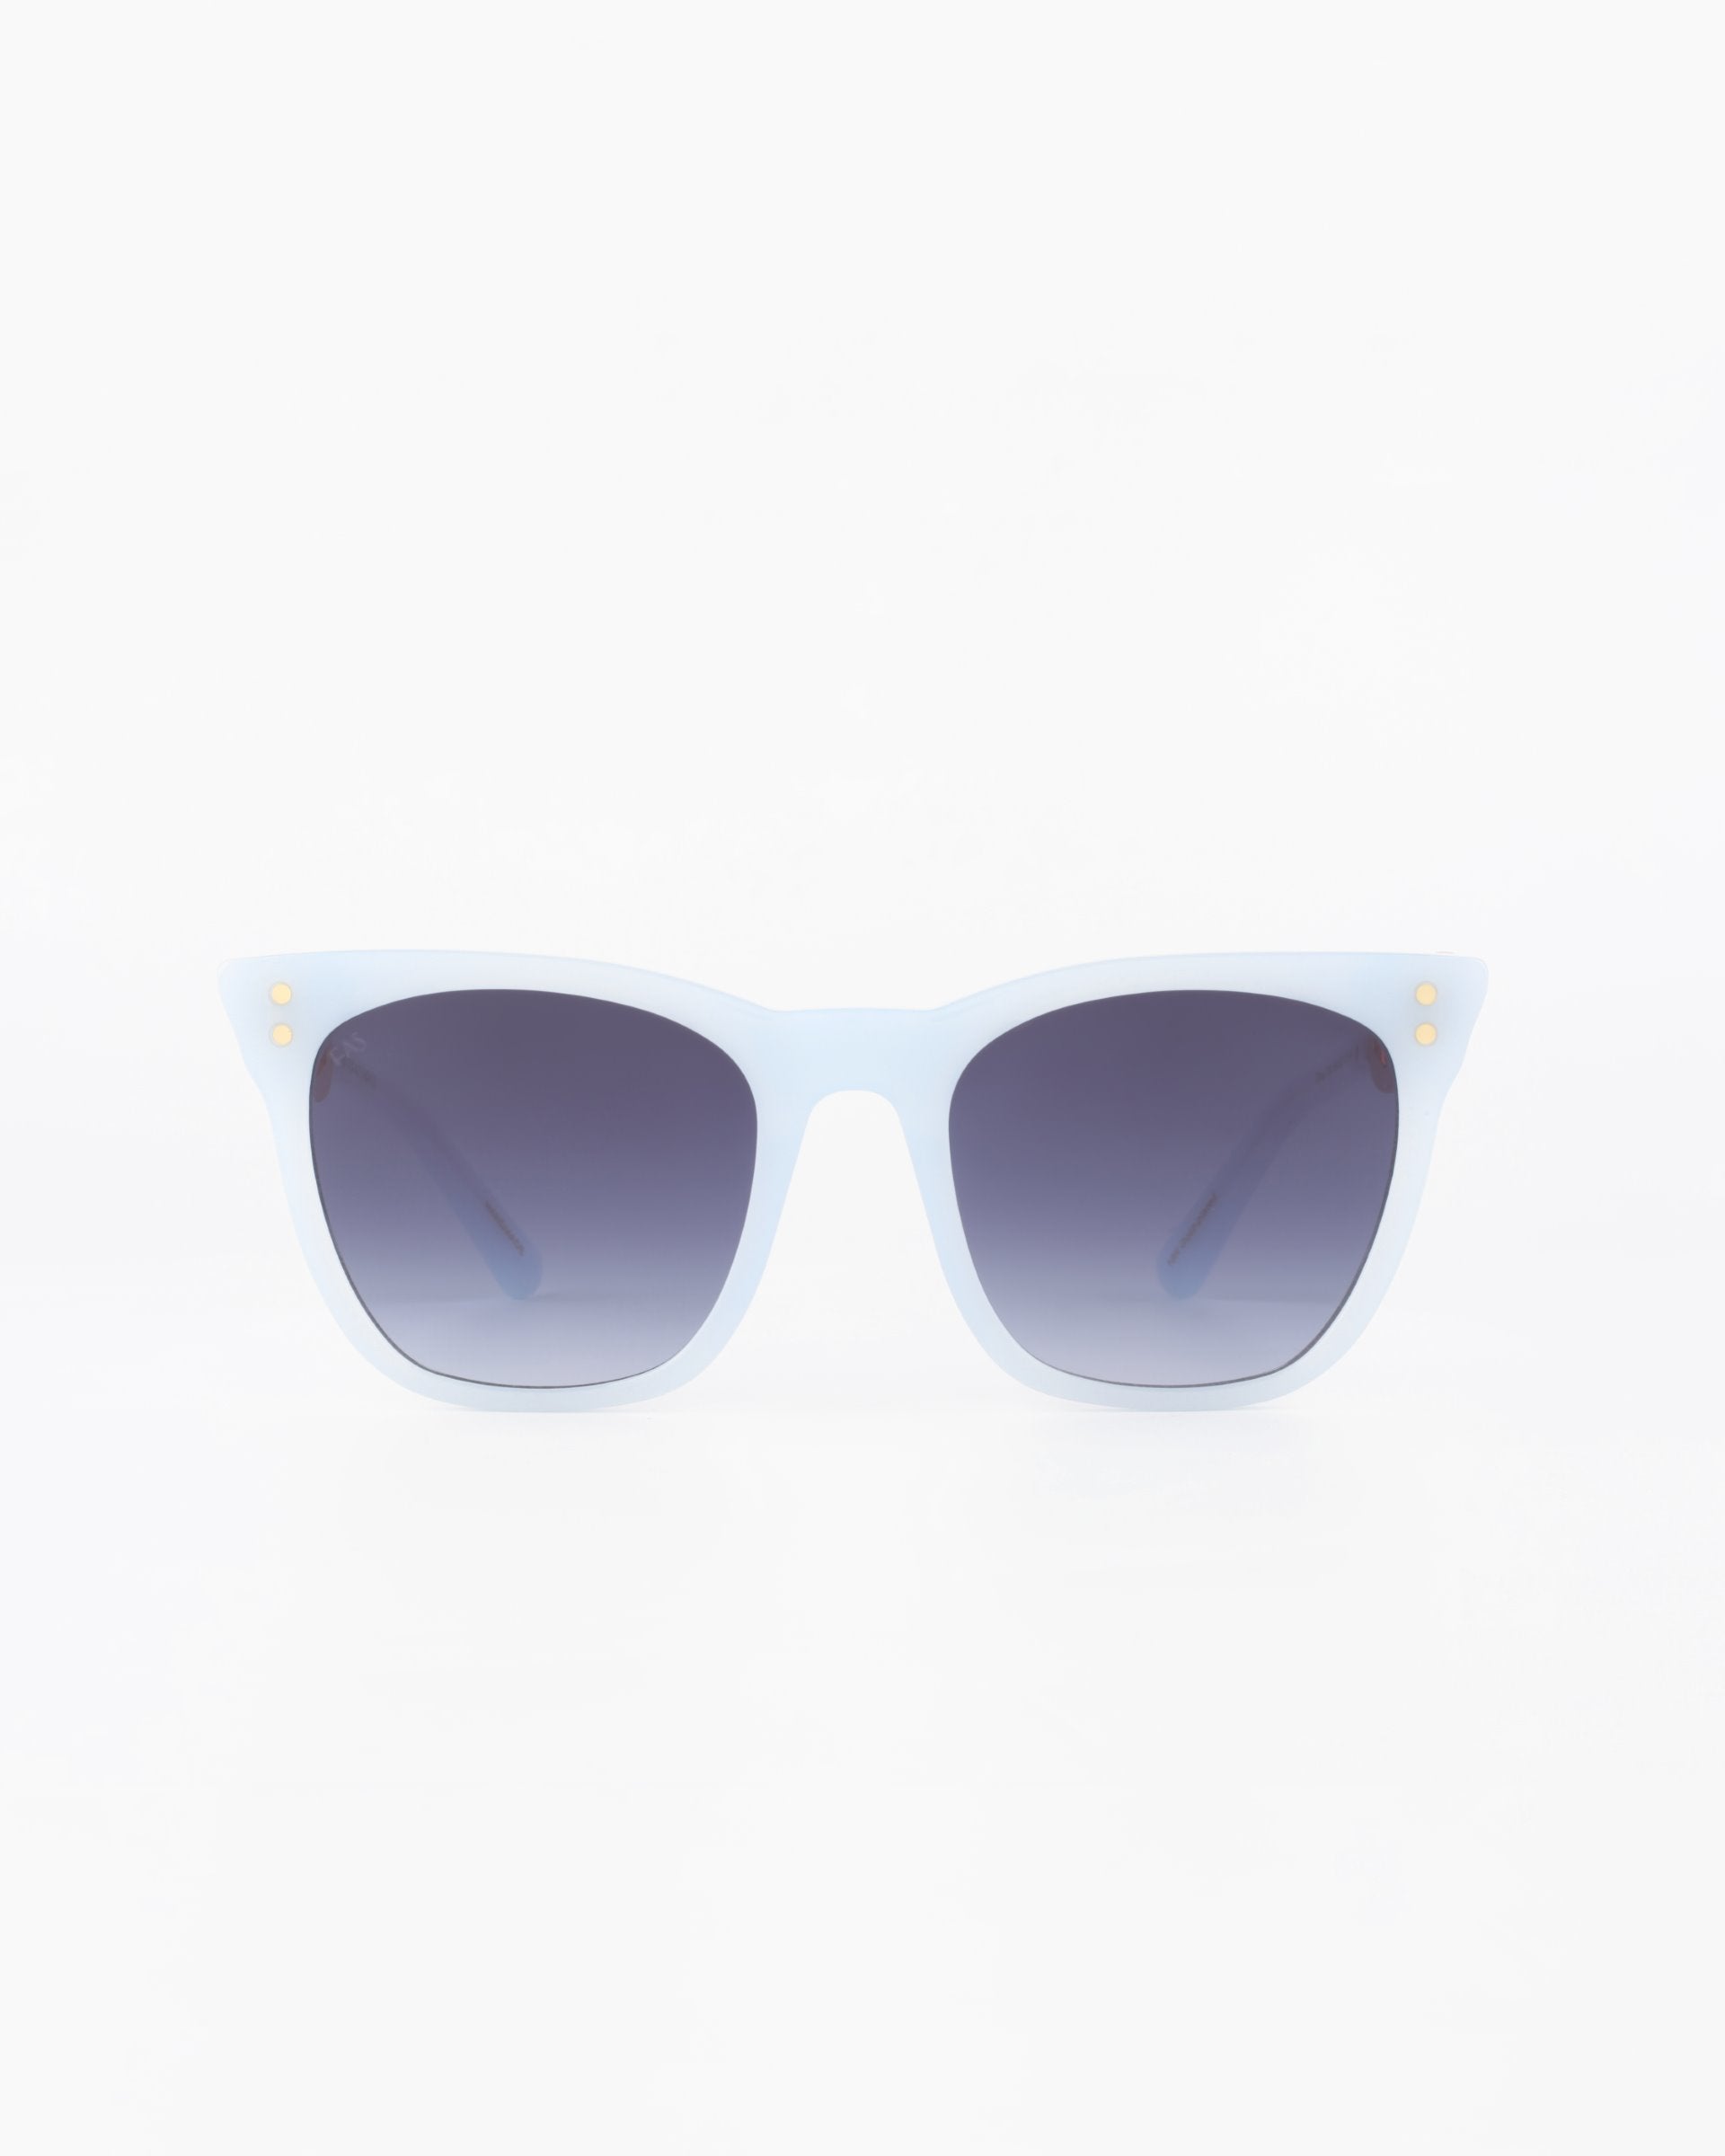 A pair of stylish cat-eye sunglasses named Deco from For Art's Sake® with a light blue acetate frame and dark, ombre lenses sits against a plain white background. The frame has subtle gold accents near the temples.